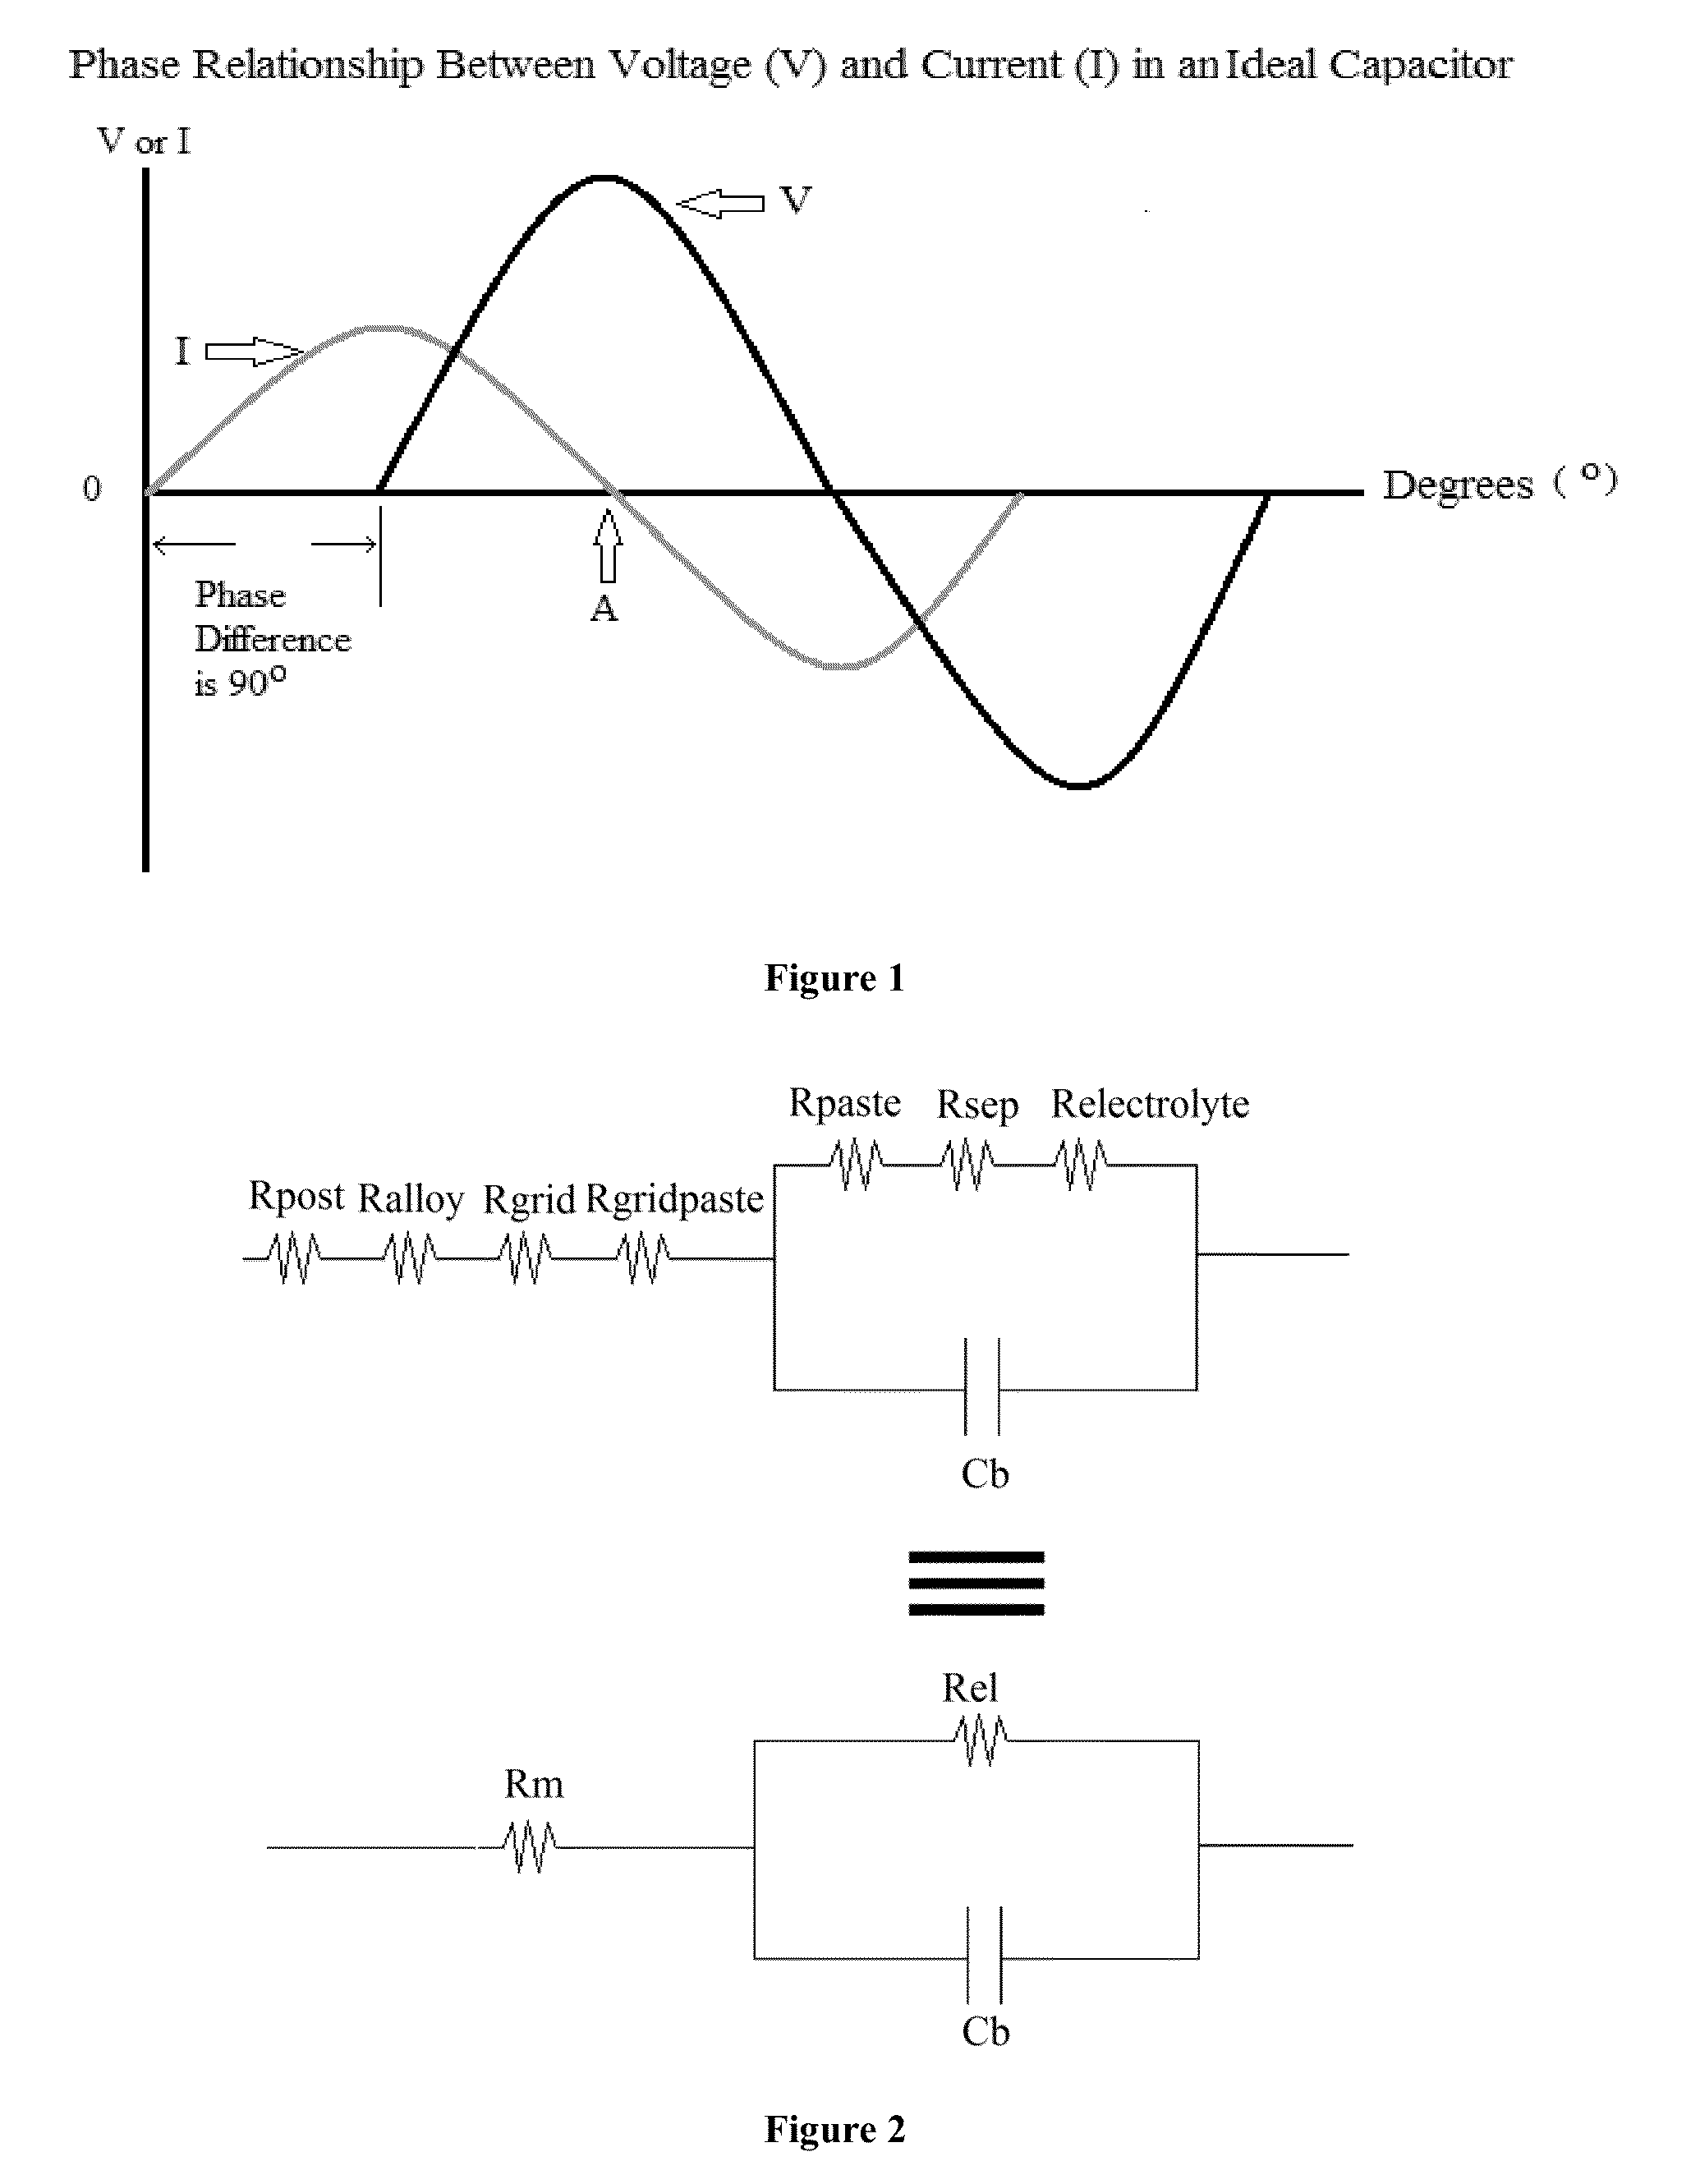 Apparatus and Method for Accurate Energy Device State-of-Charge (SoC) Monitoring and Control using Real-Time State-of-Health (SoH) Data